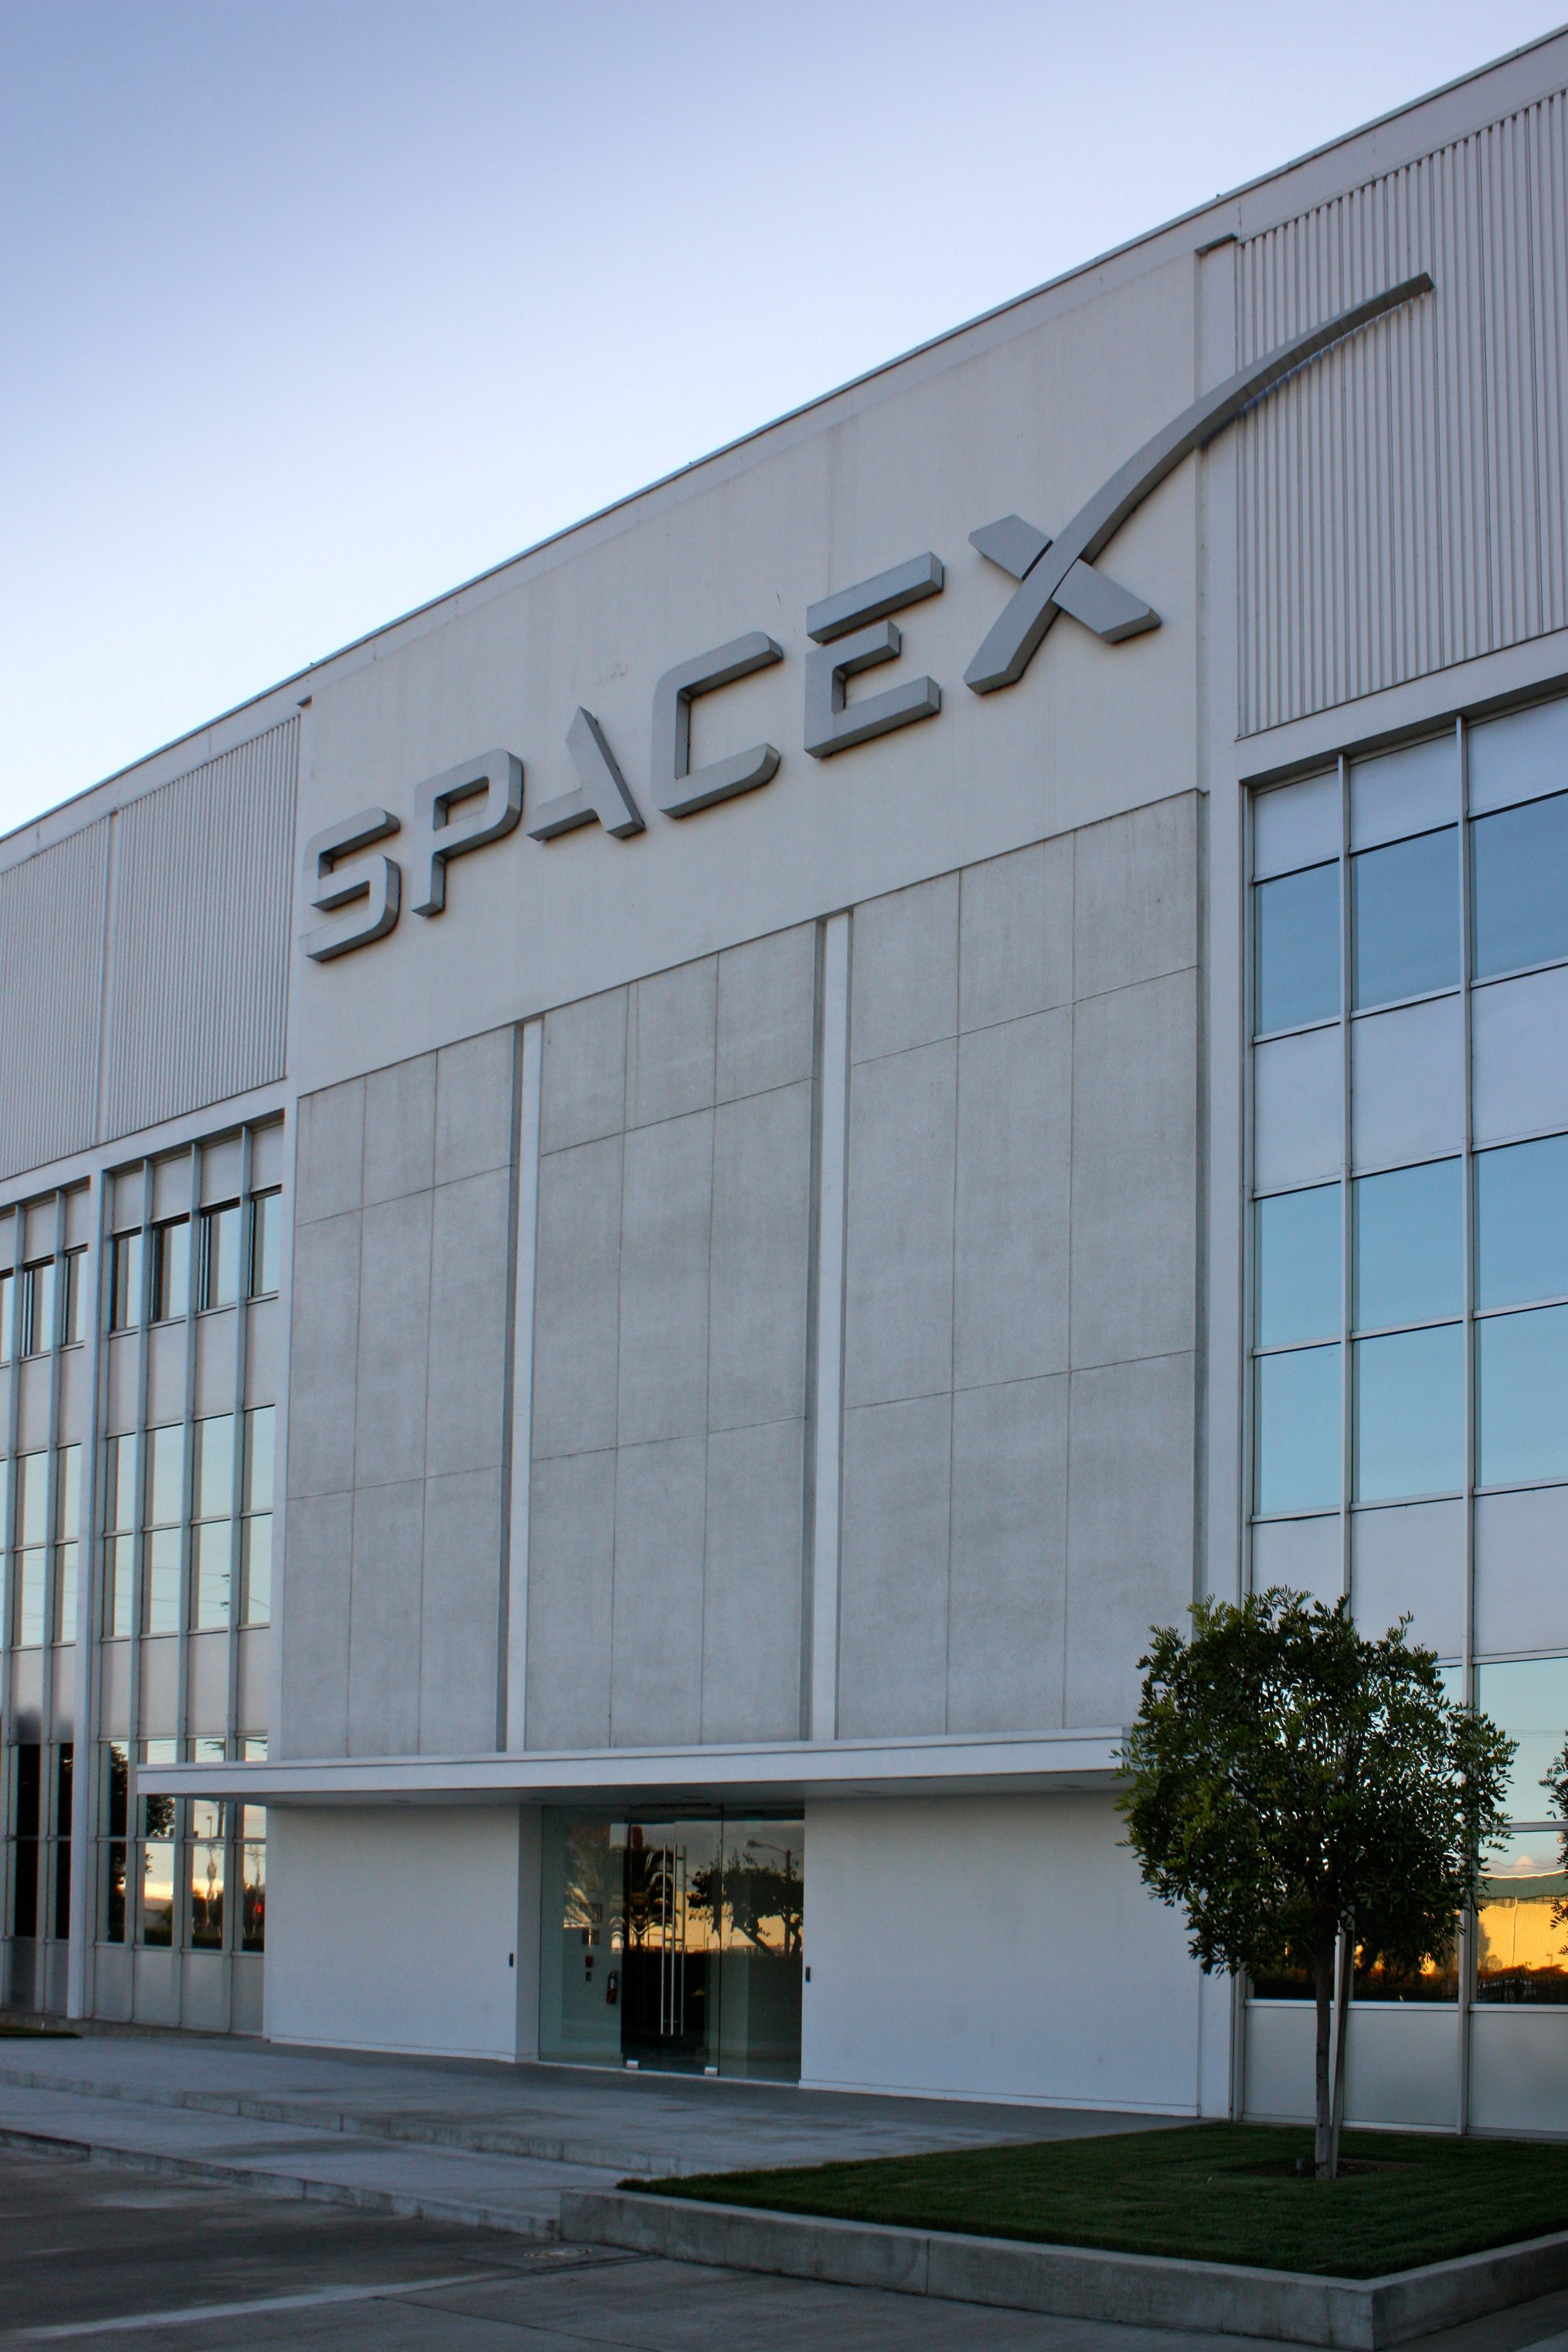 Entrance_to_SpaceX_headquarters[1].jpg